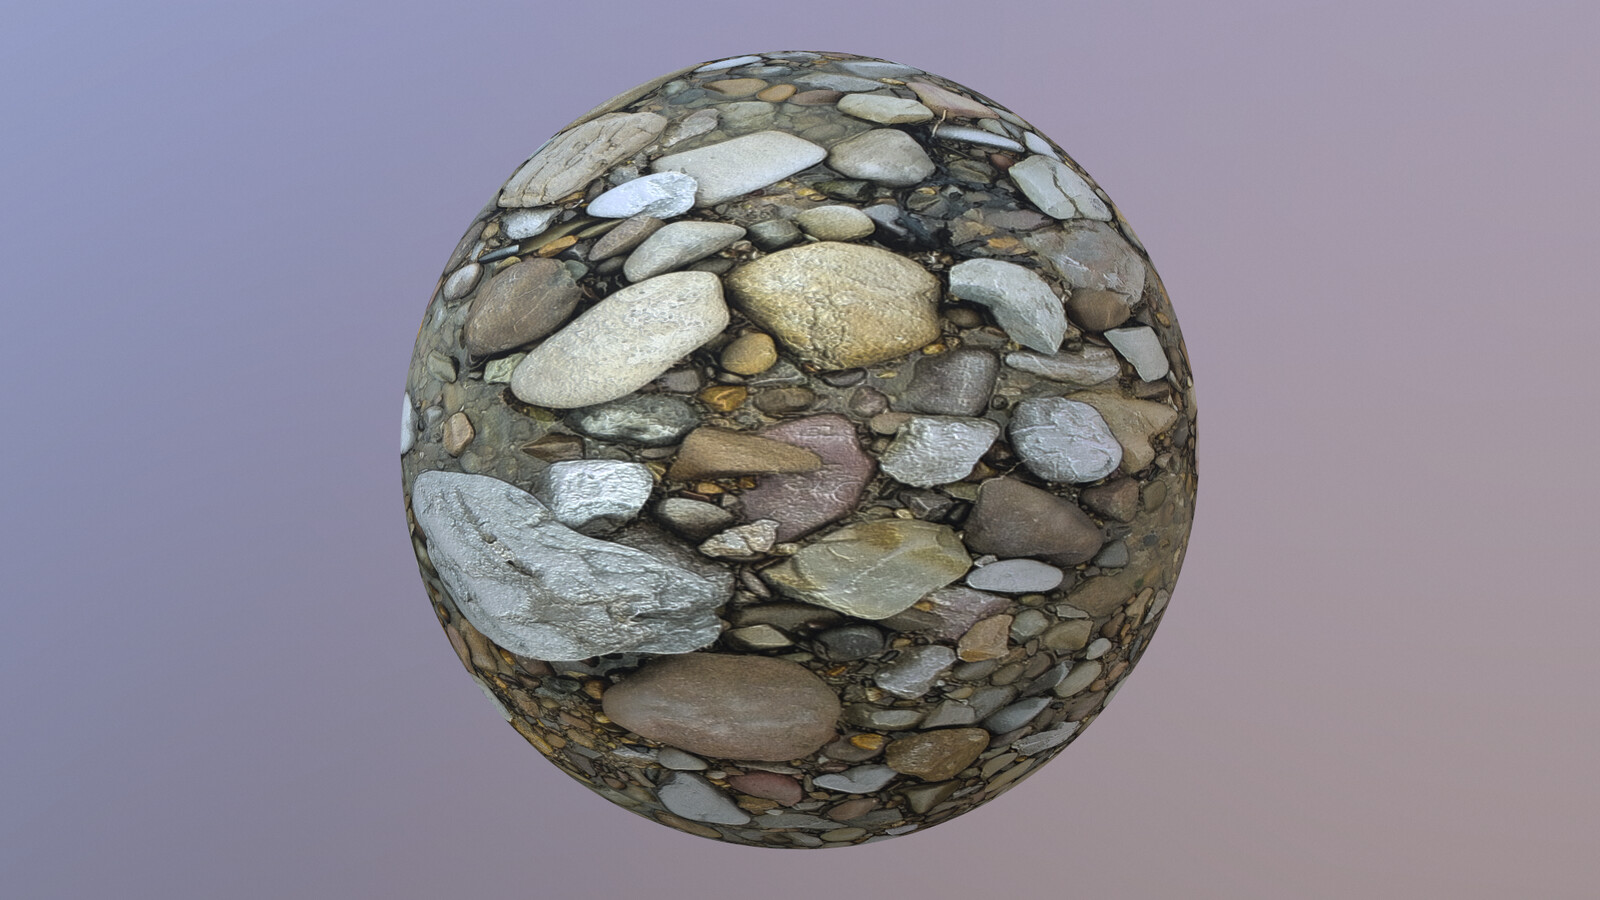 Pebbles and stones texture 